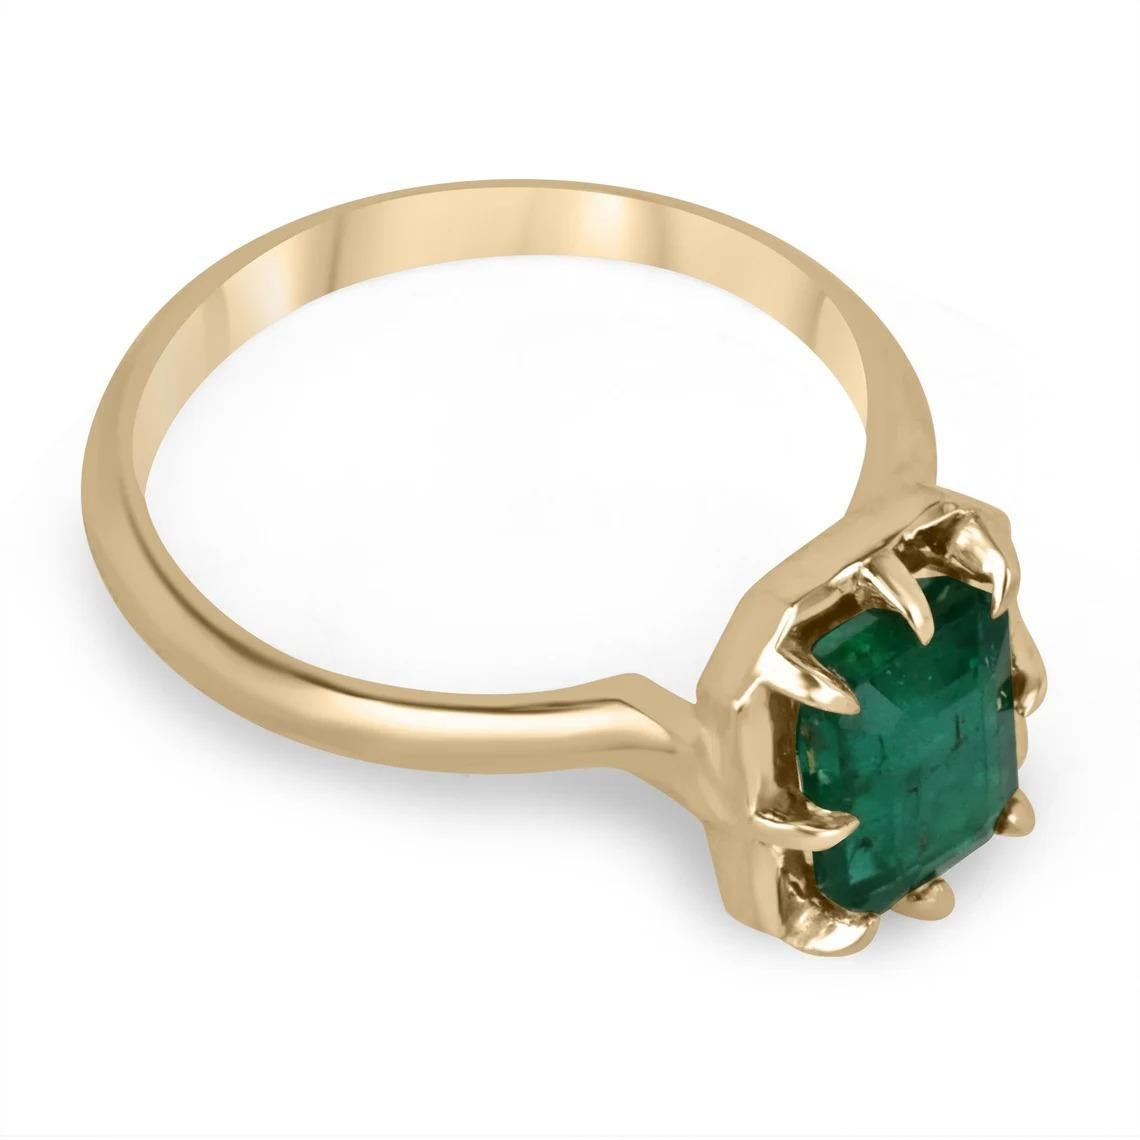 Displayed is a solitaire emerald ring. This gorgeous piece carries a full 1.69-carat Zambian emerald in an eight-prong Georgian/collet 14K yellow gold setting; with an antique finish that can be seen from the shank. Fully faceted, this gemstone